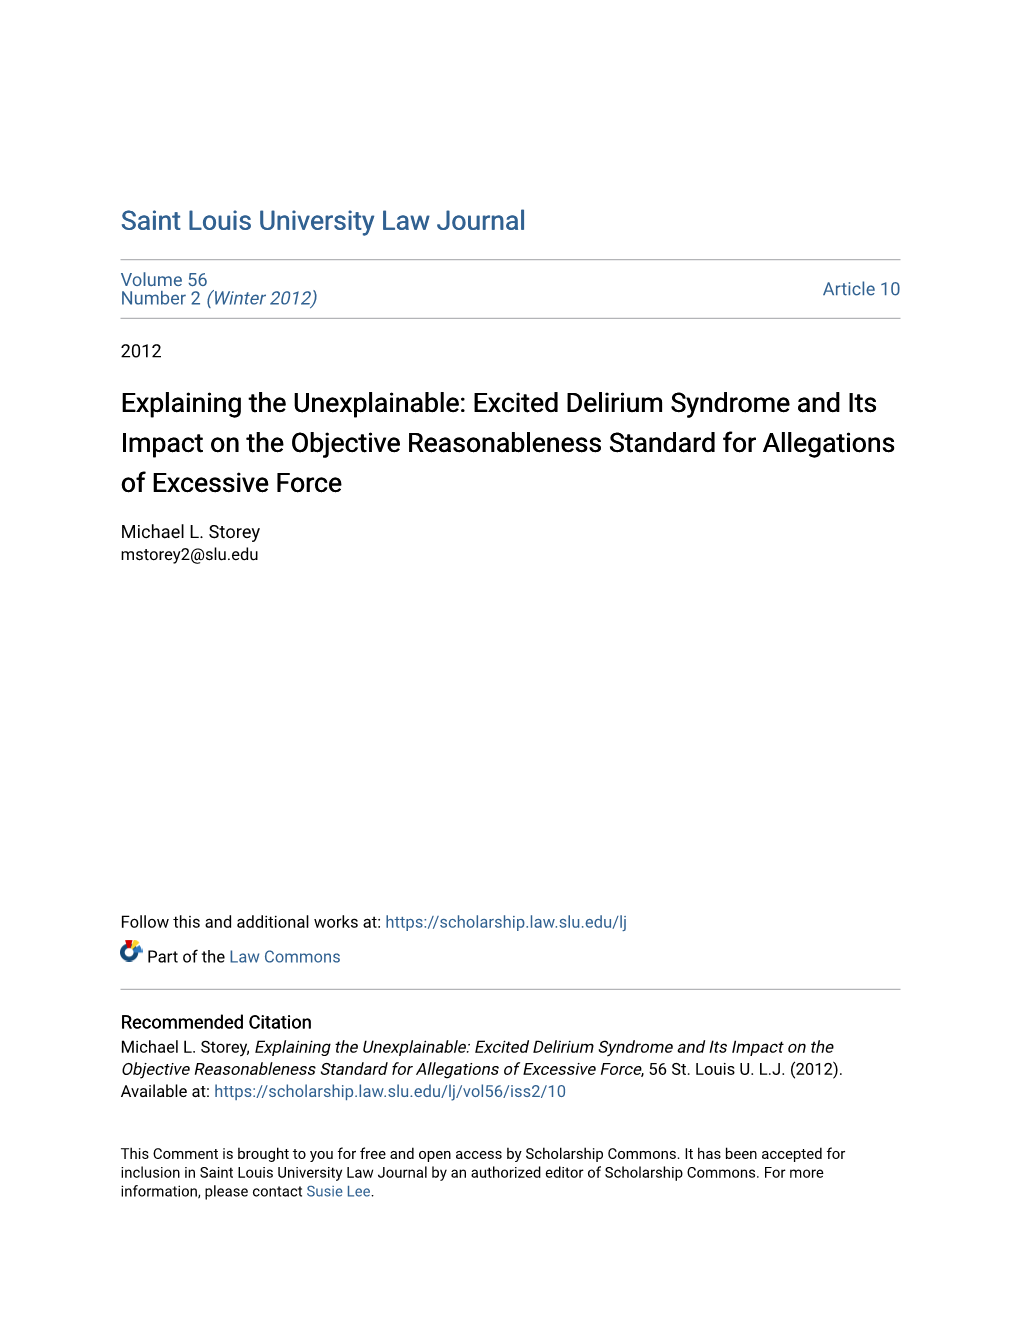 Explaining the Unexplainable: Excited Delirium Syndrome and Its Impact on the Objective Reasonableness Standard for Allegations of Excessive Force